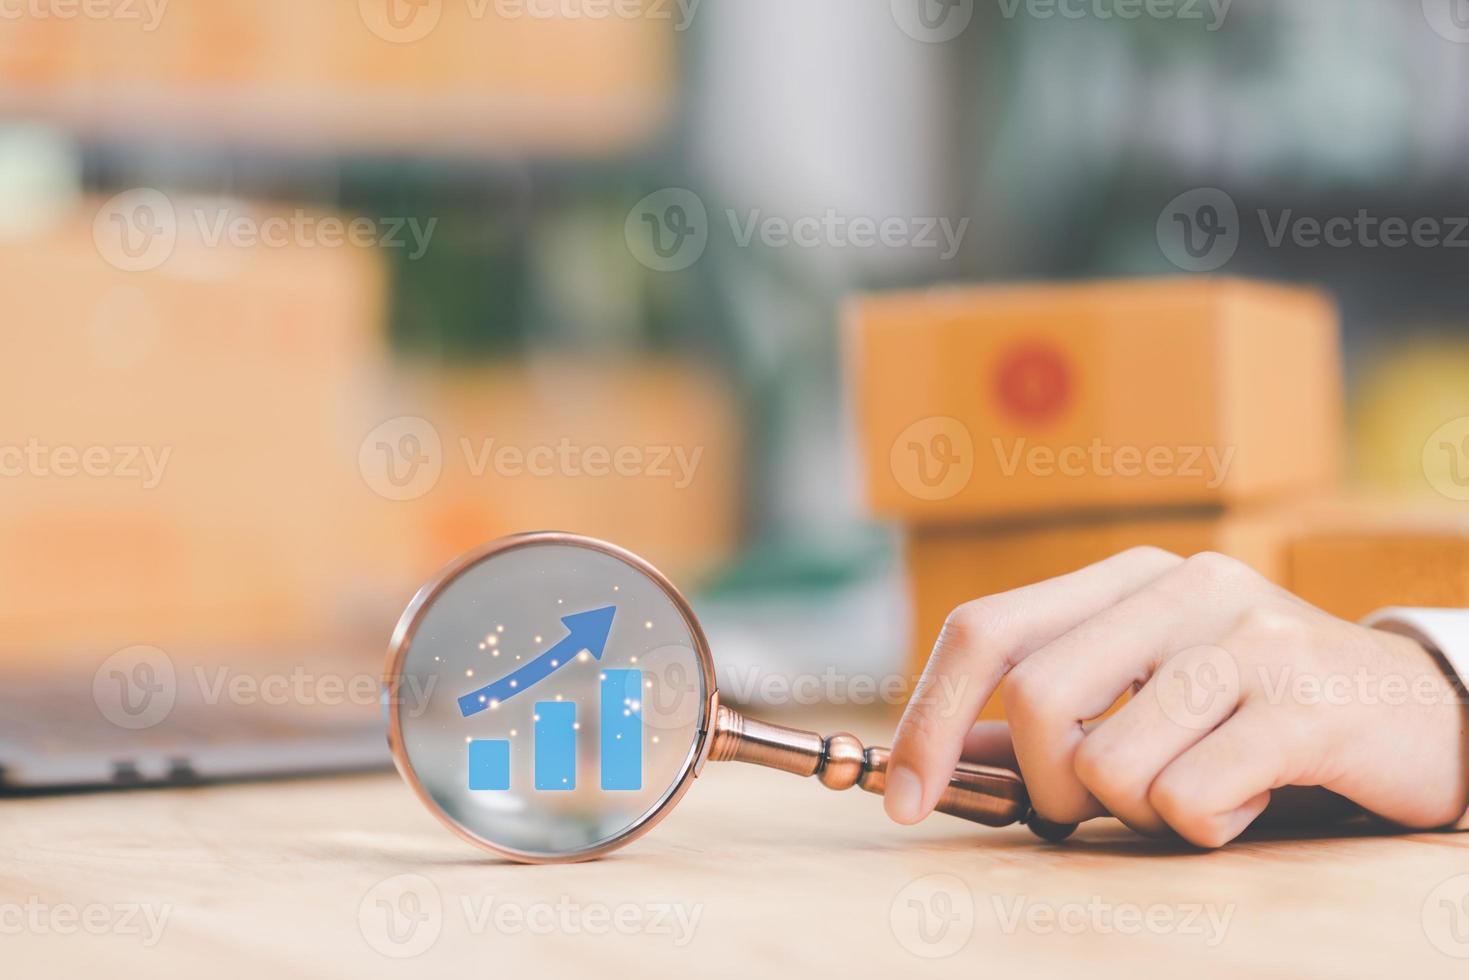 Startup or small business entrepreneur holding a magnifying glass, business growth graph, internet shopping, internet online shopping, SME, delivery box, e-commerce,business goal setting photo